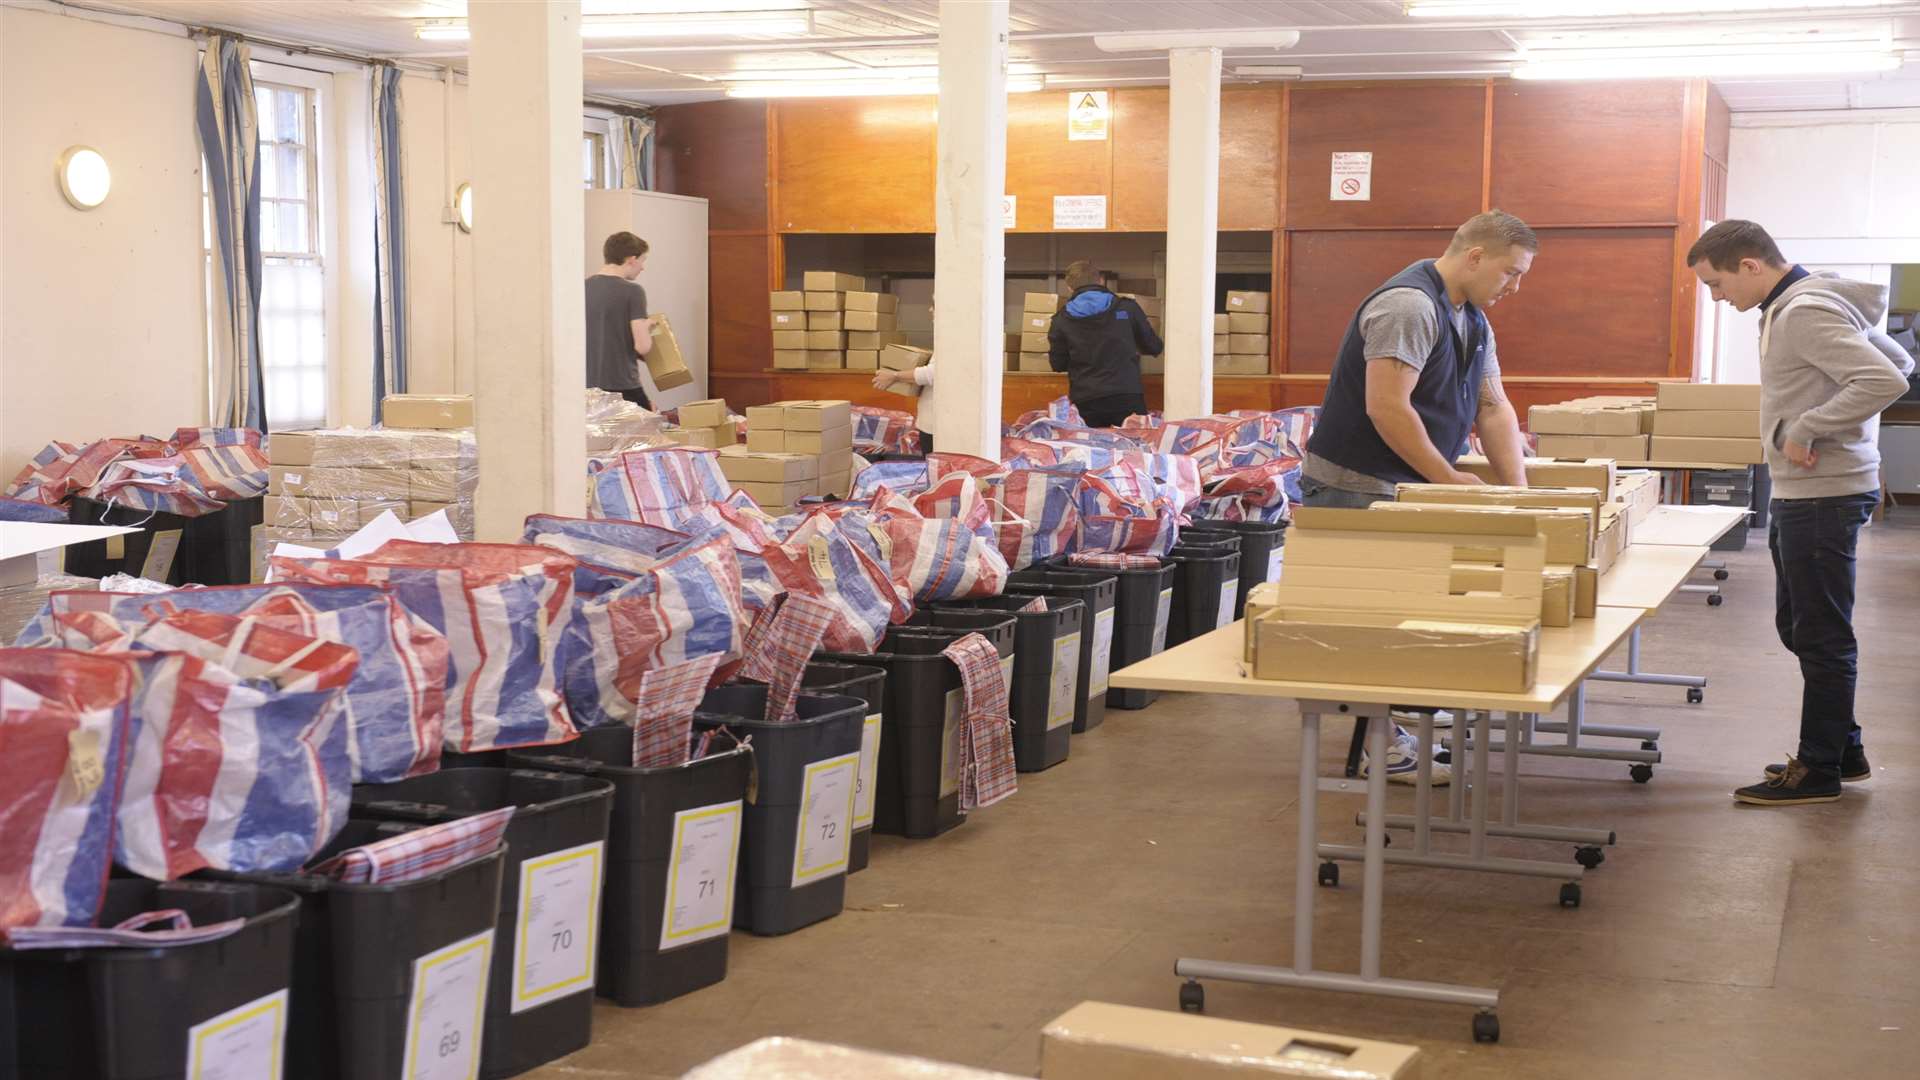 Ballot boxes and papers before an election. Stock image